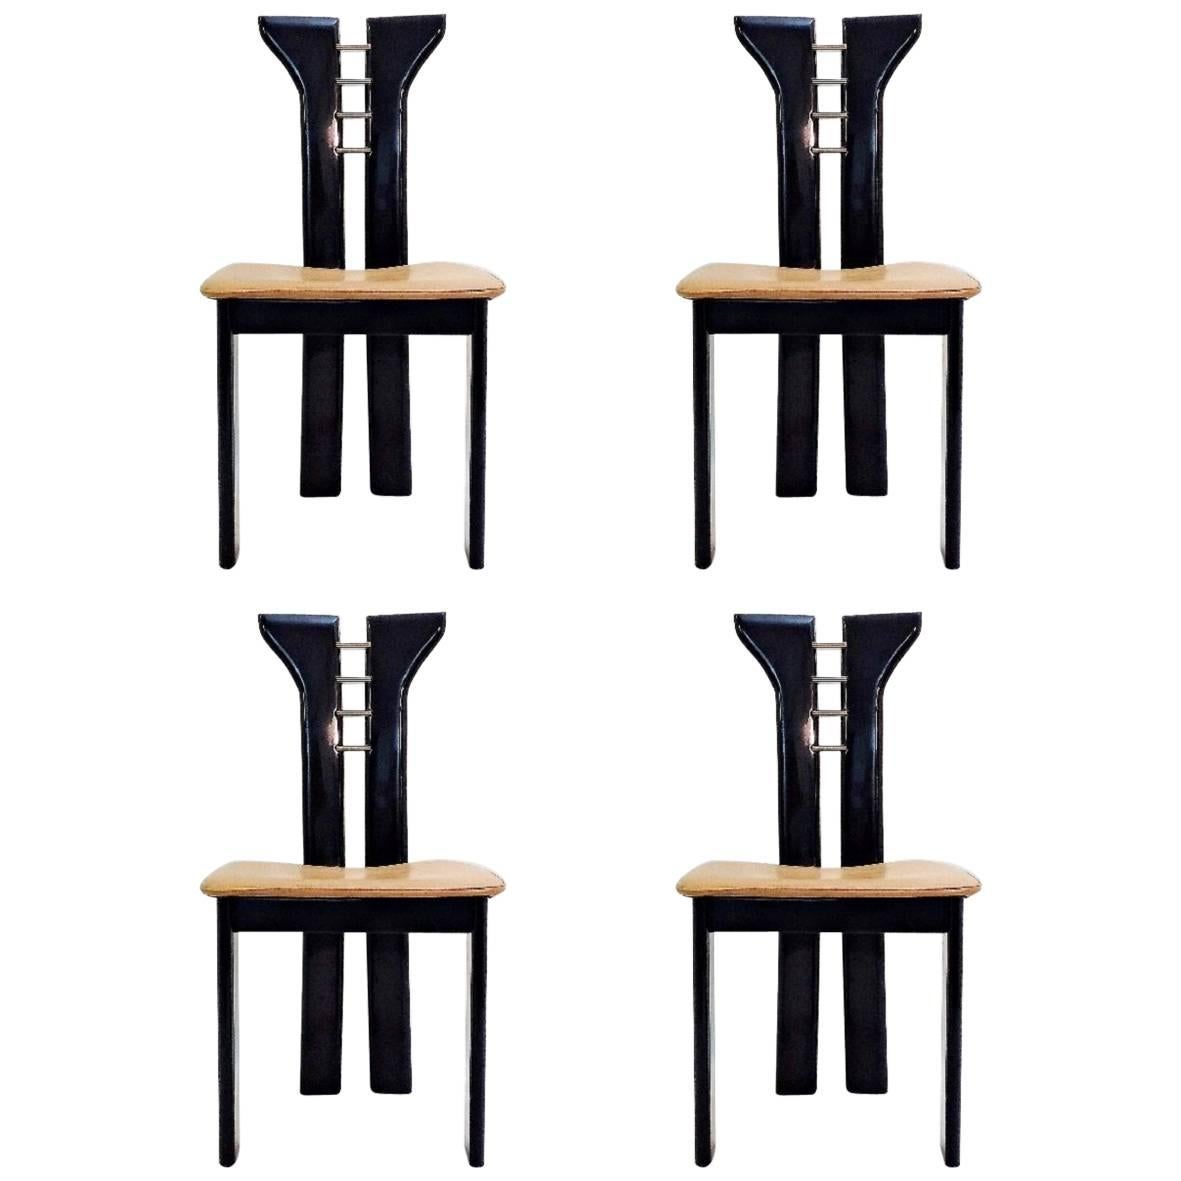 Set of Four Dinning Room Chairs by Cardin, Italy, circa 1950